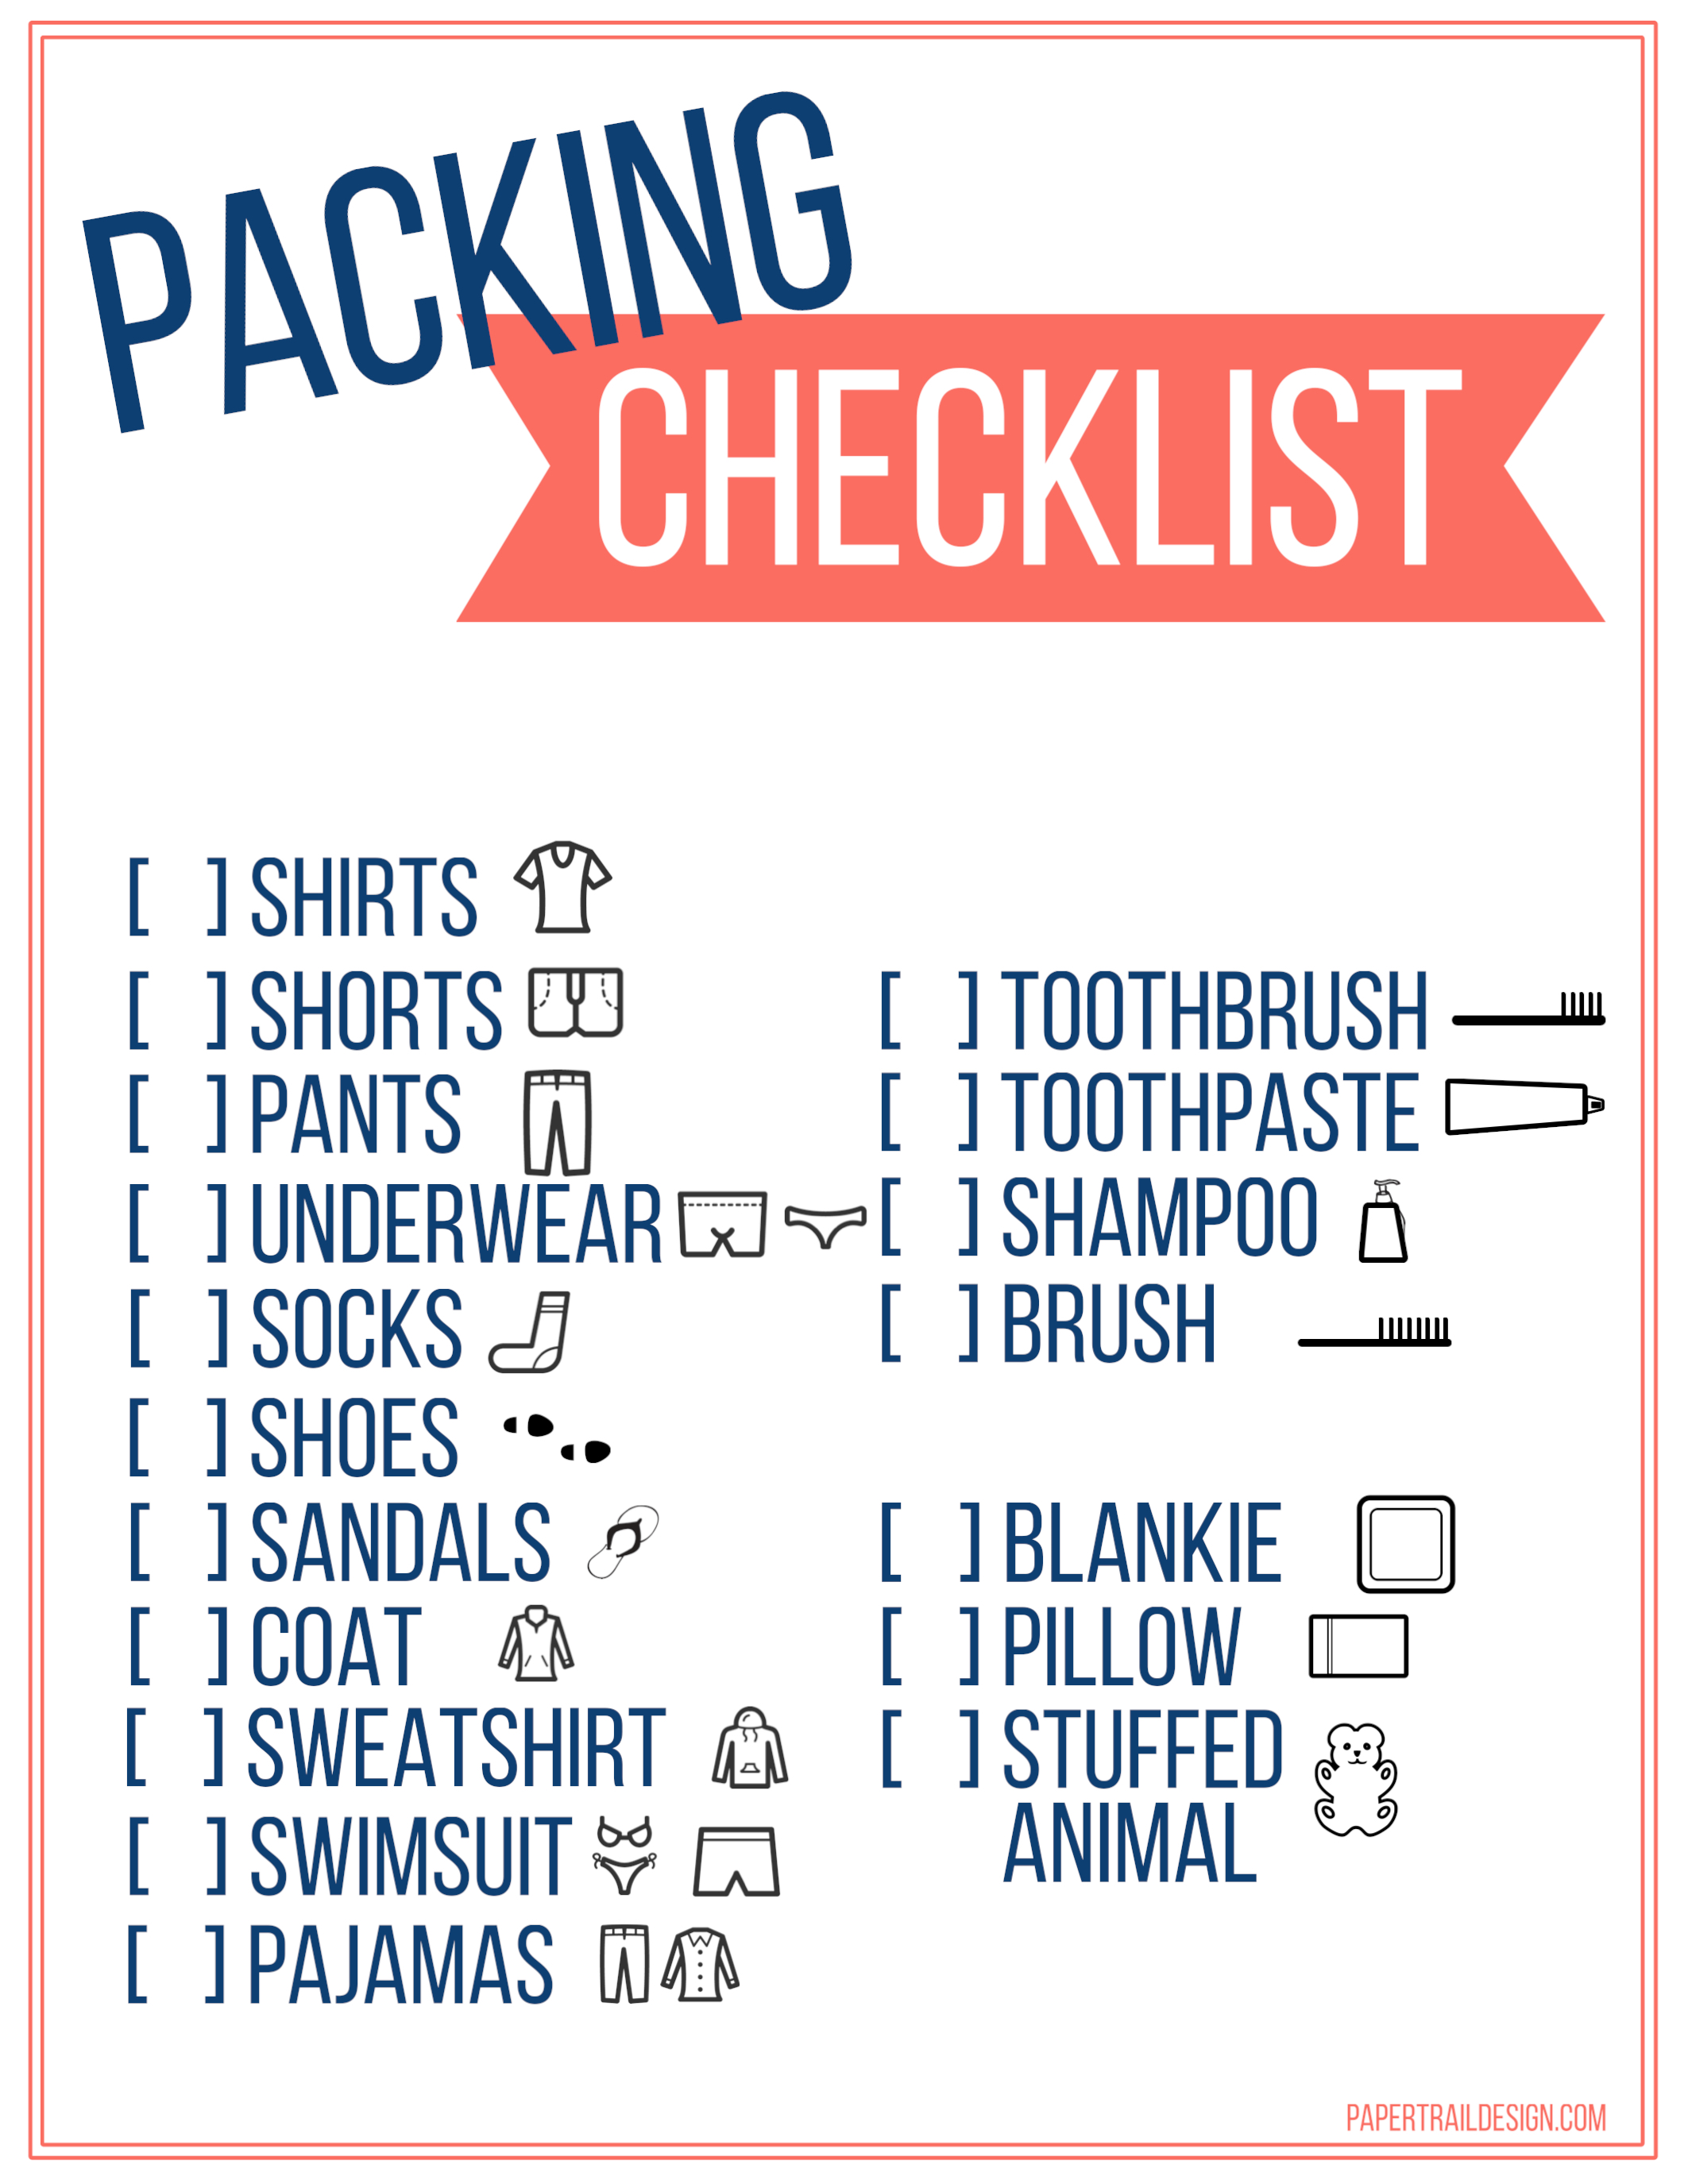 10 Free Packing Checklists — Print Them Out Before Your Next Trip